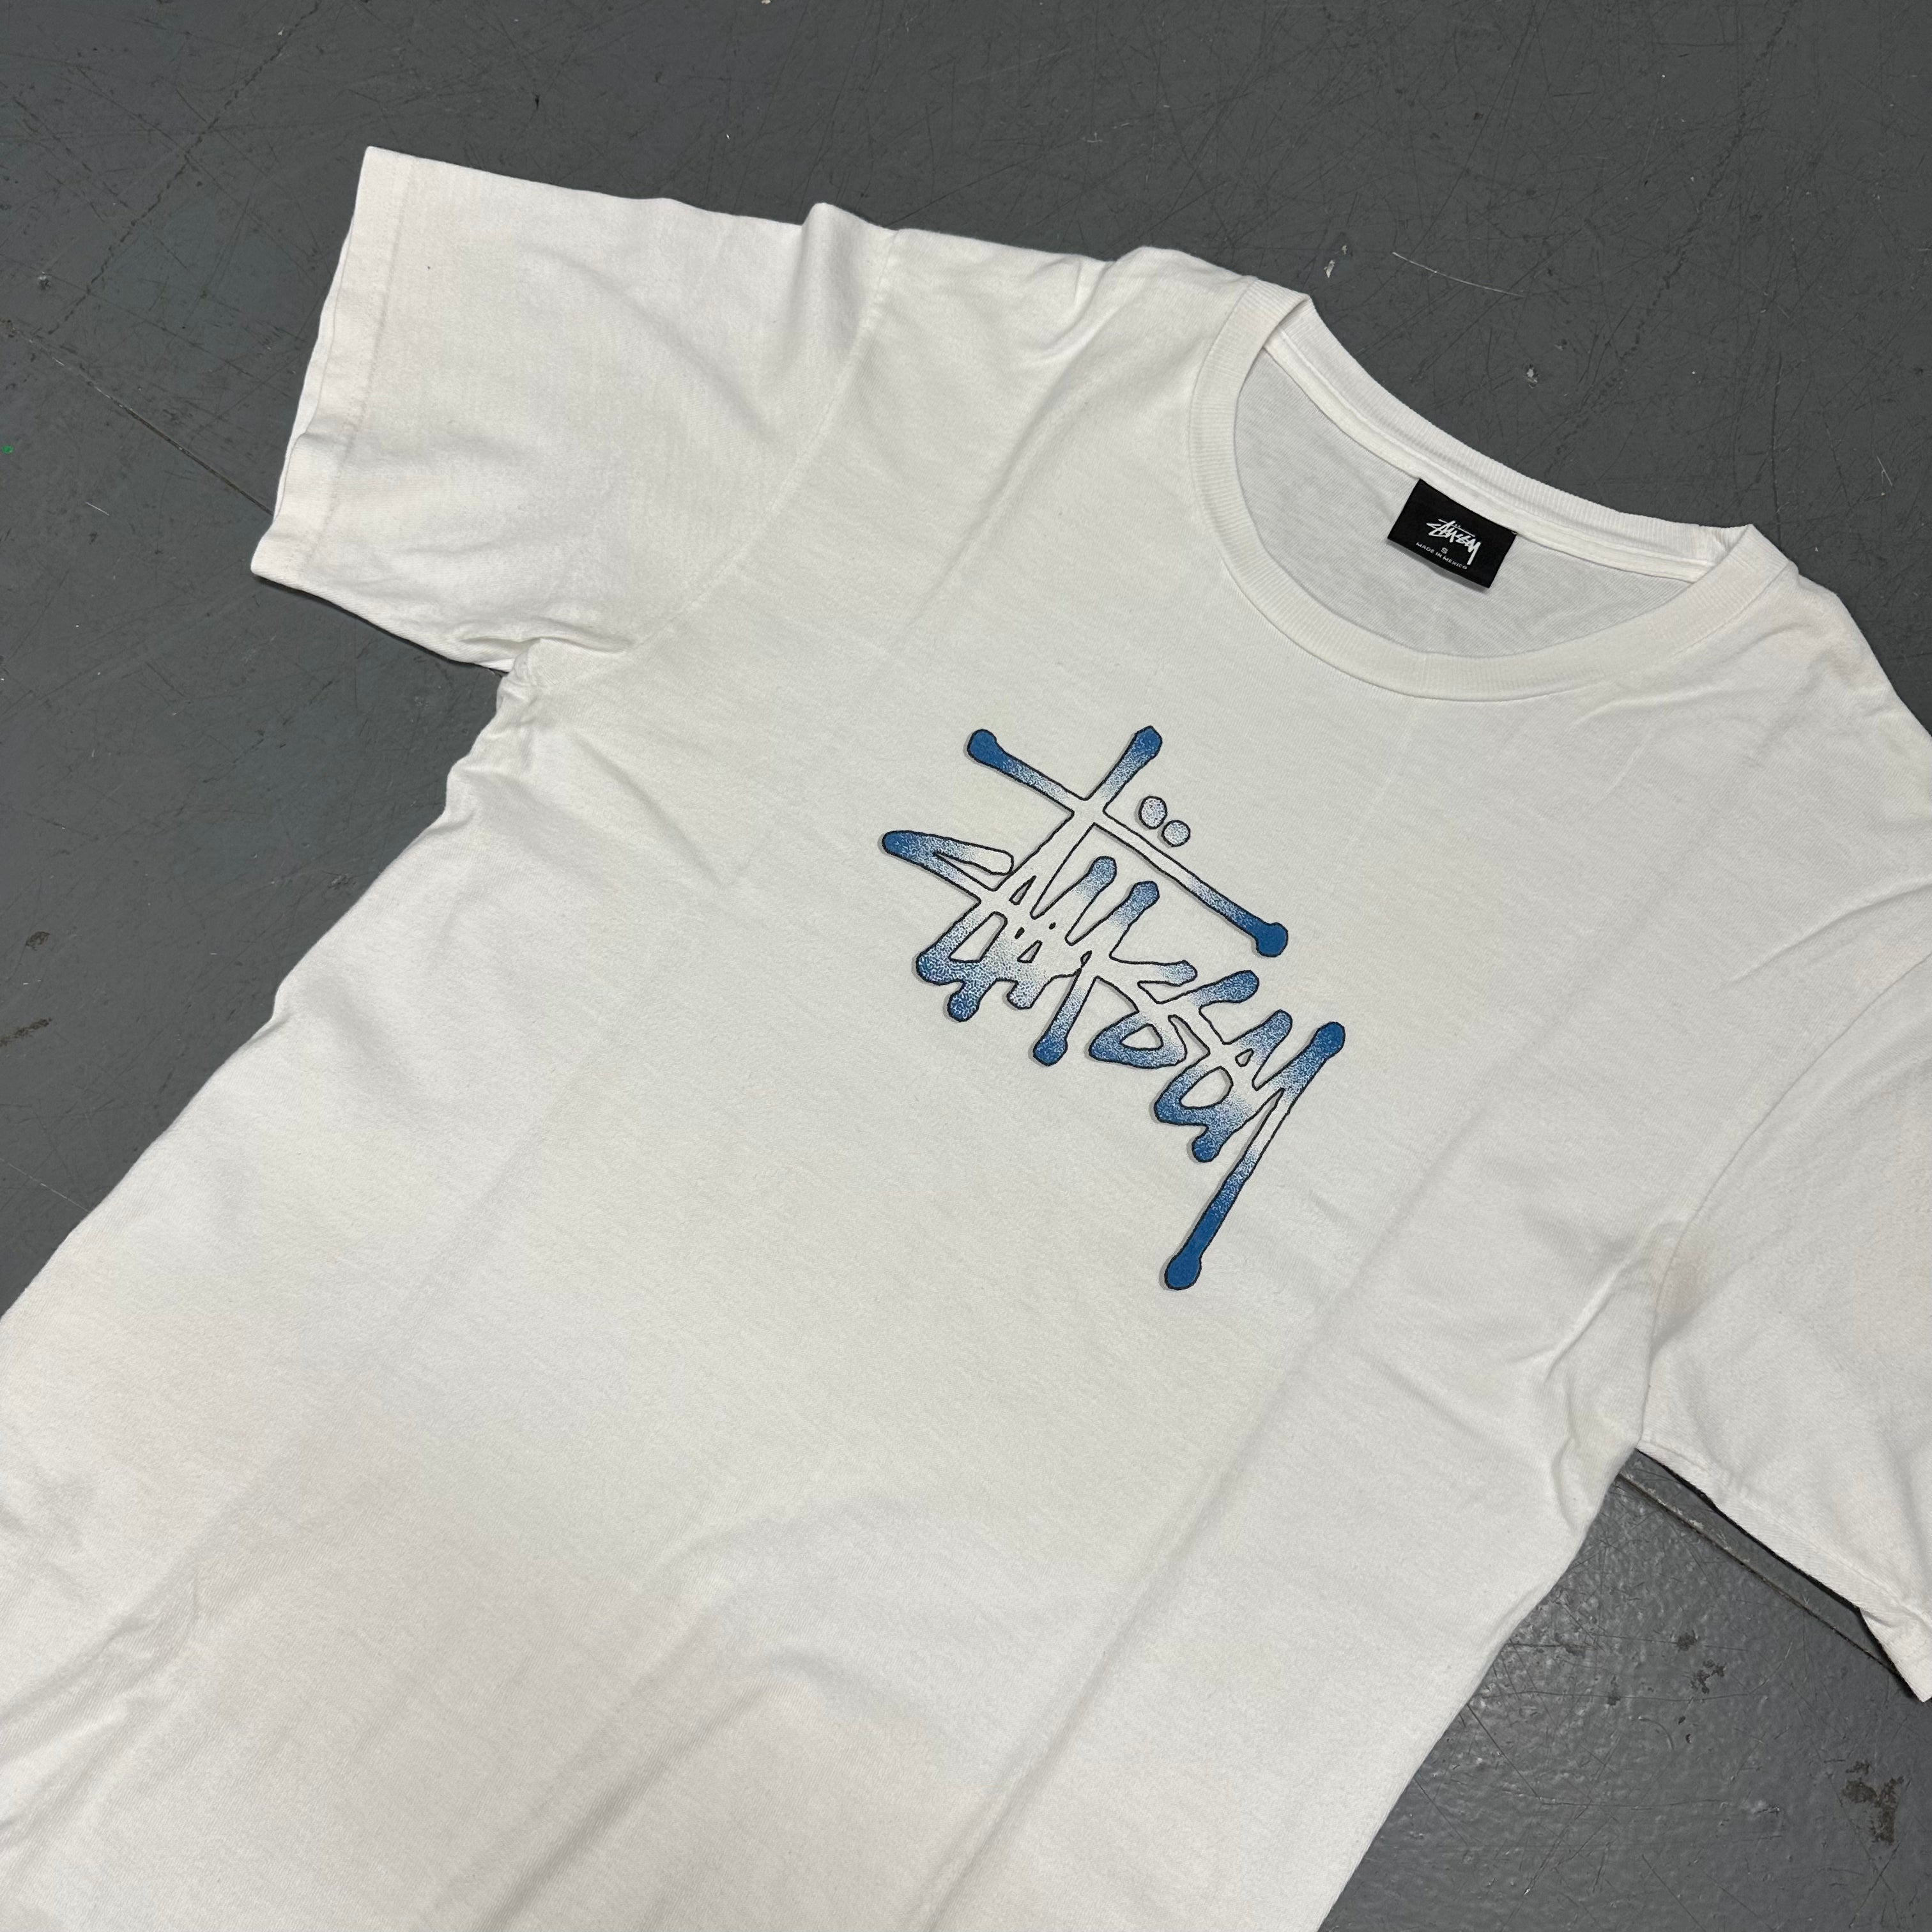 Stüssy Spellout T-Shirt In White ( S )